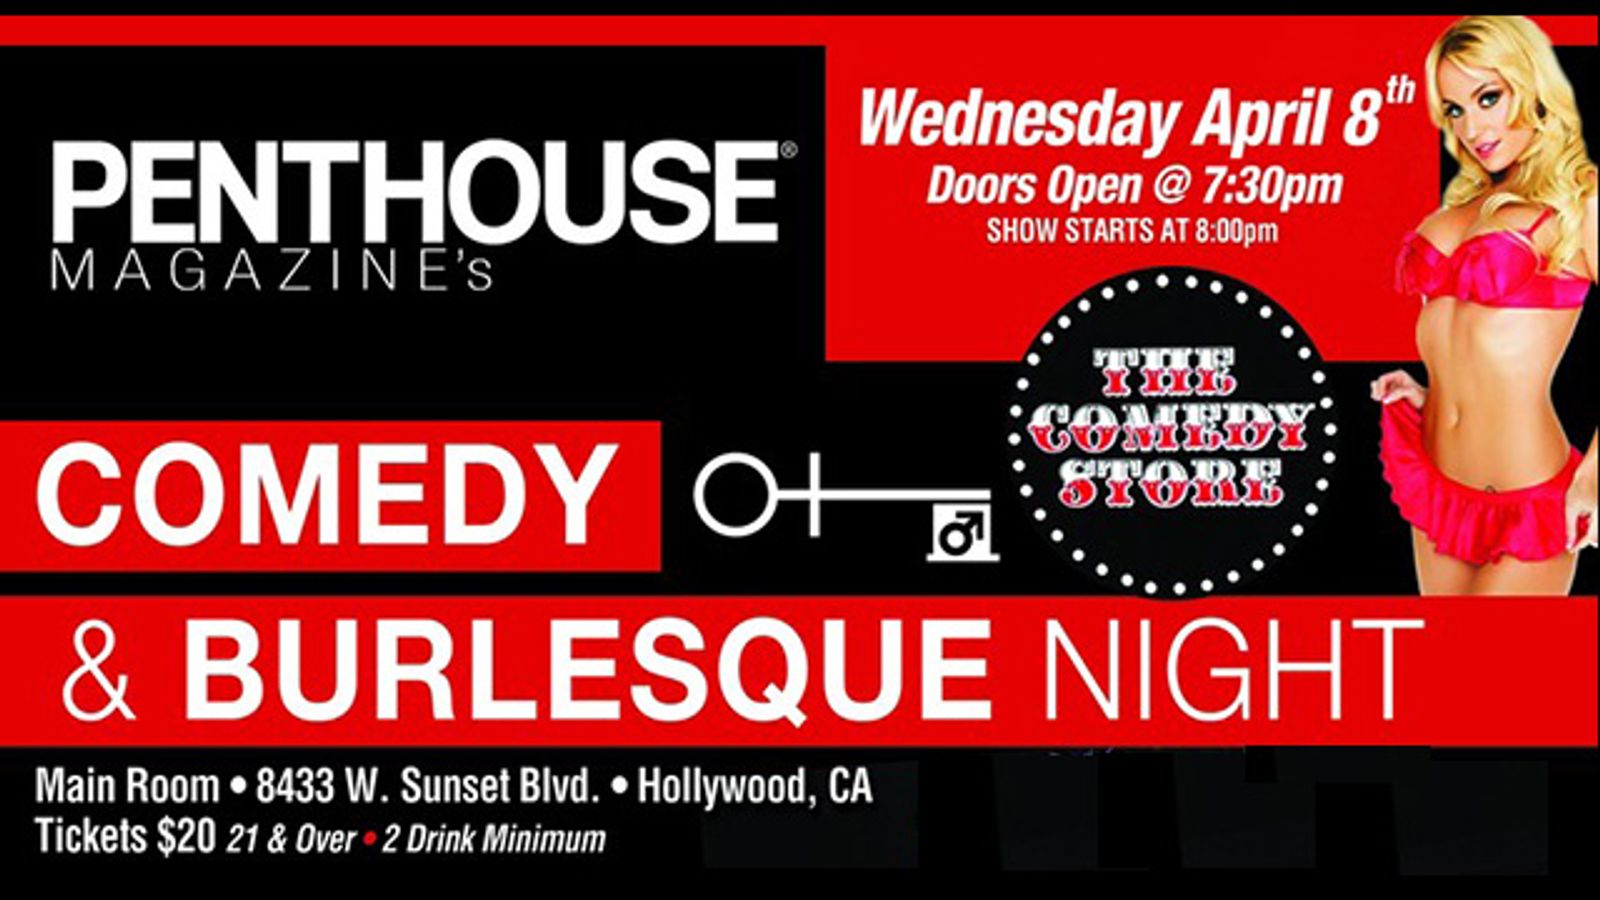 2nd Penthouse Burlesque & Comedy Night Set For April 8